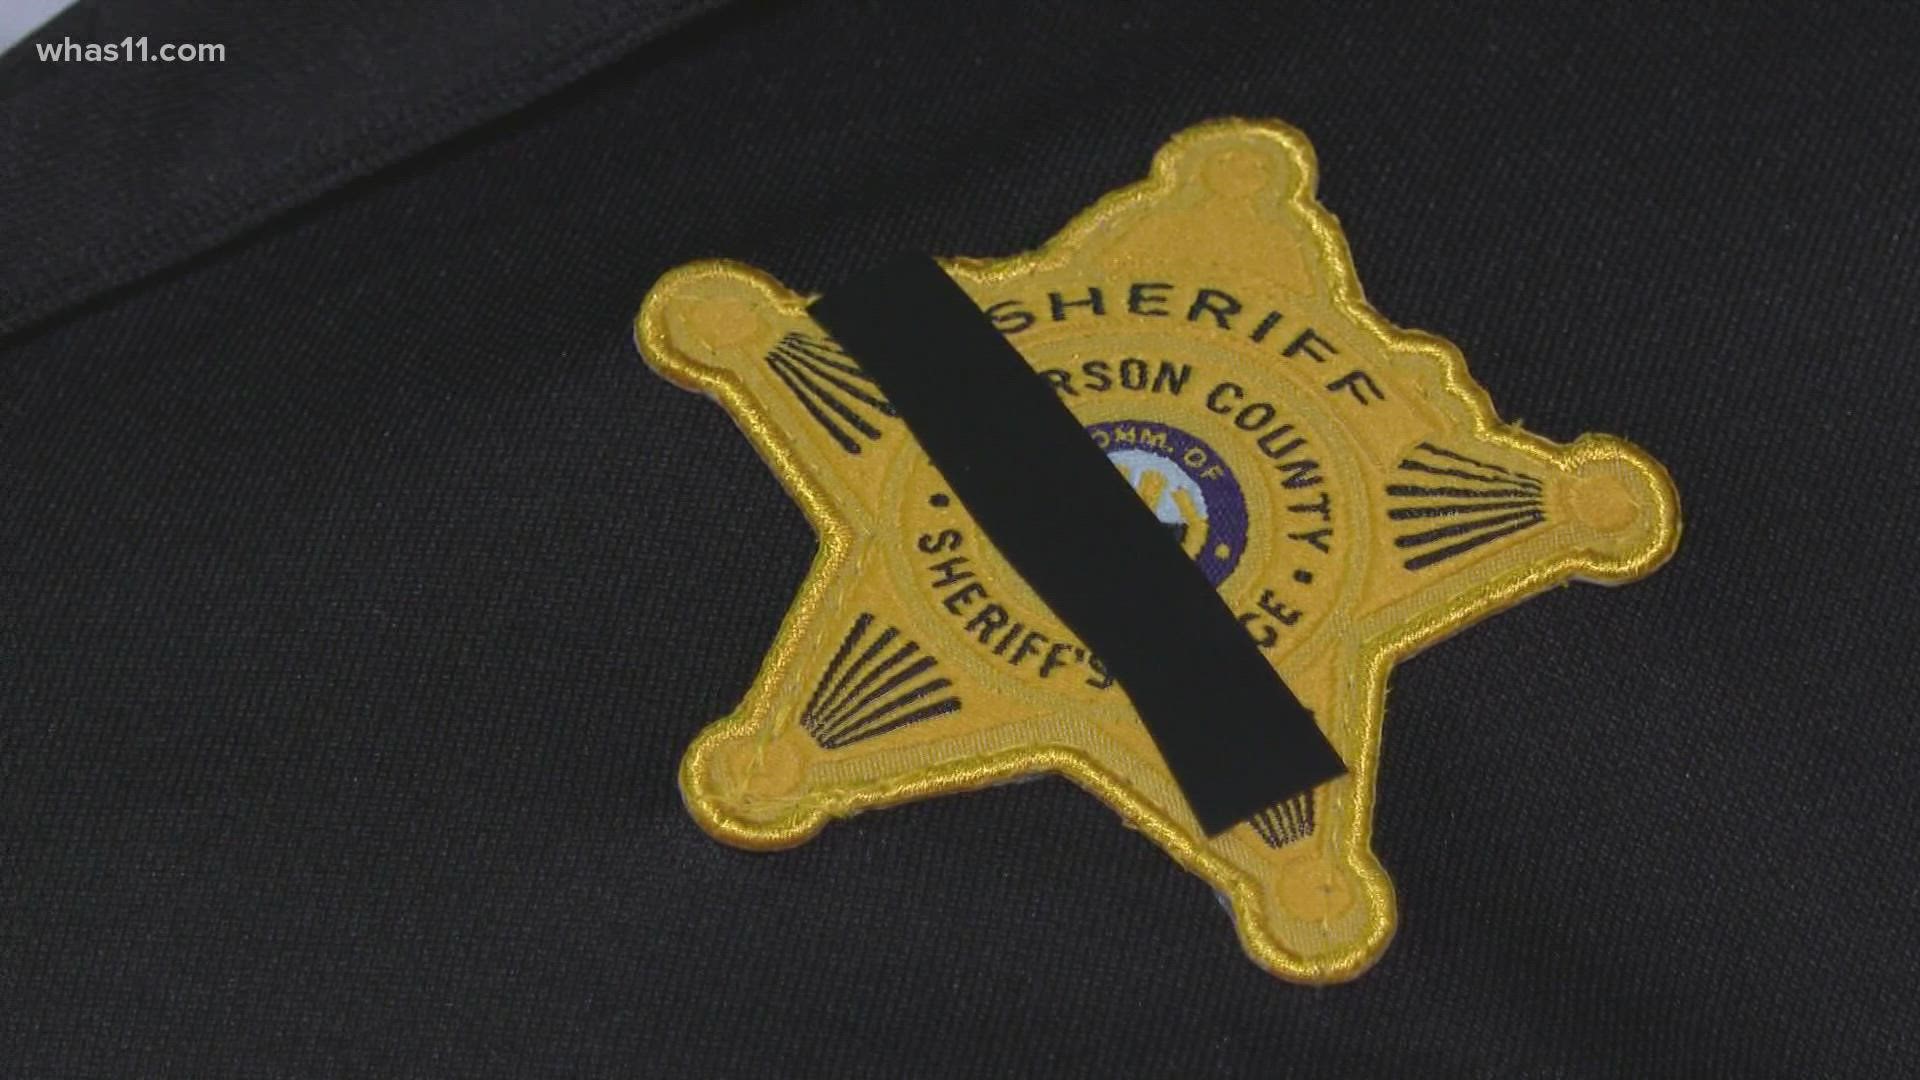 Federal law enforcement agencies have joined the investigation into the murder of Jefferson County sheriff's deputy Brandon Shirley